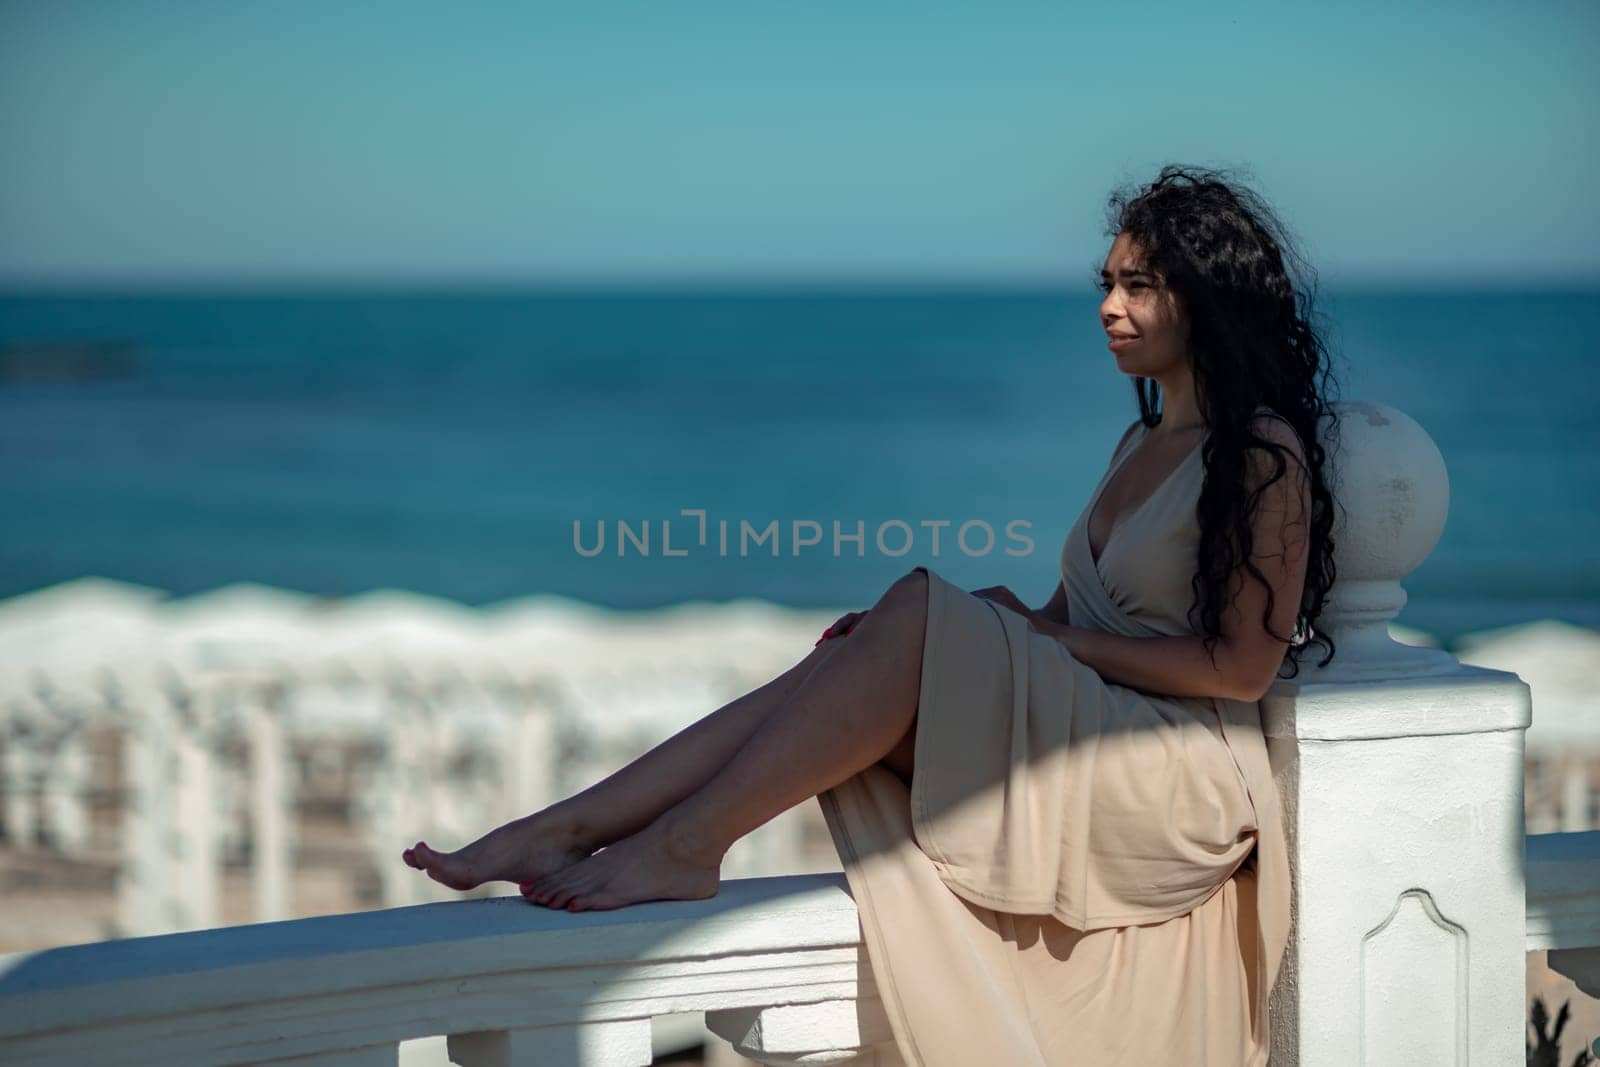 A woman in a tan dress is sitting on a white railing overlooking the ocean. The scene is serene and peaceful, with the woman enjoying the view and the calming sound of the waves. by Matiunina